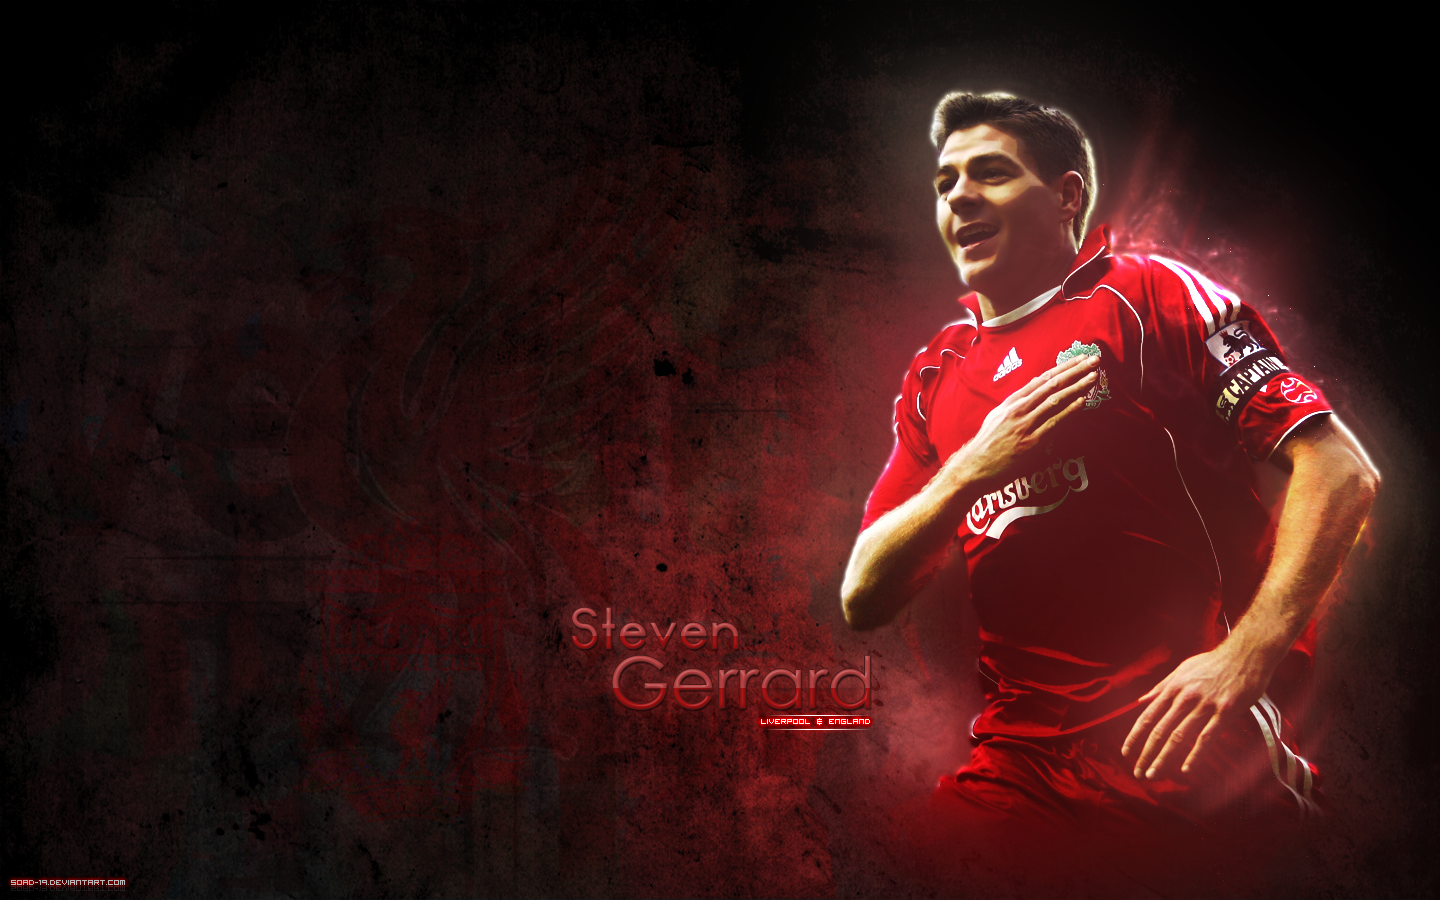 Top Liverpool Fc Wallpaper 2013 Images for Pinterest